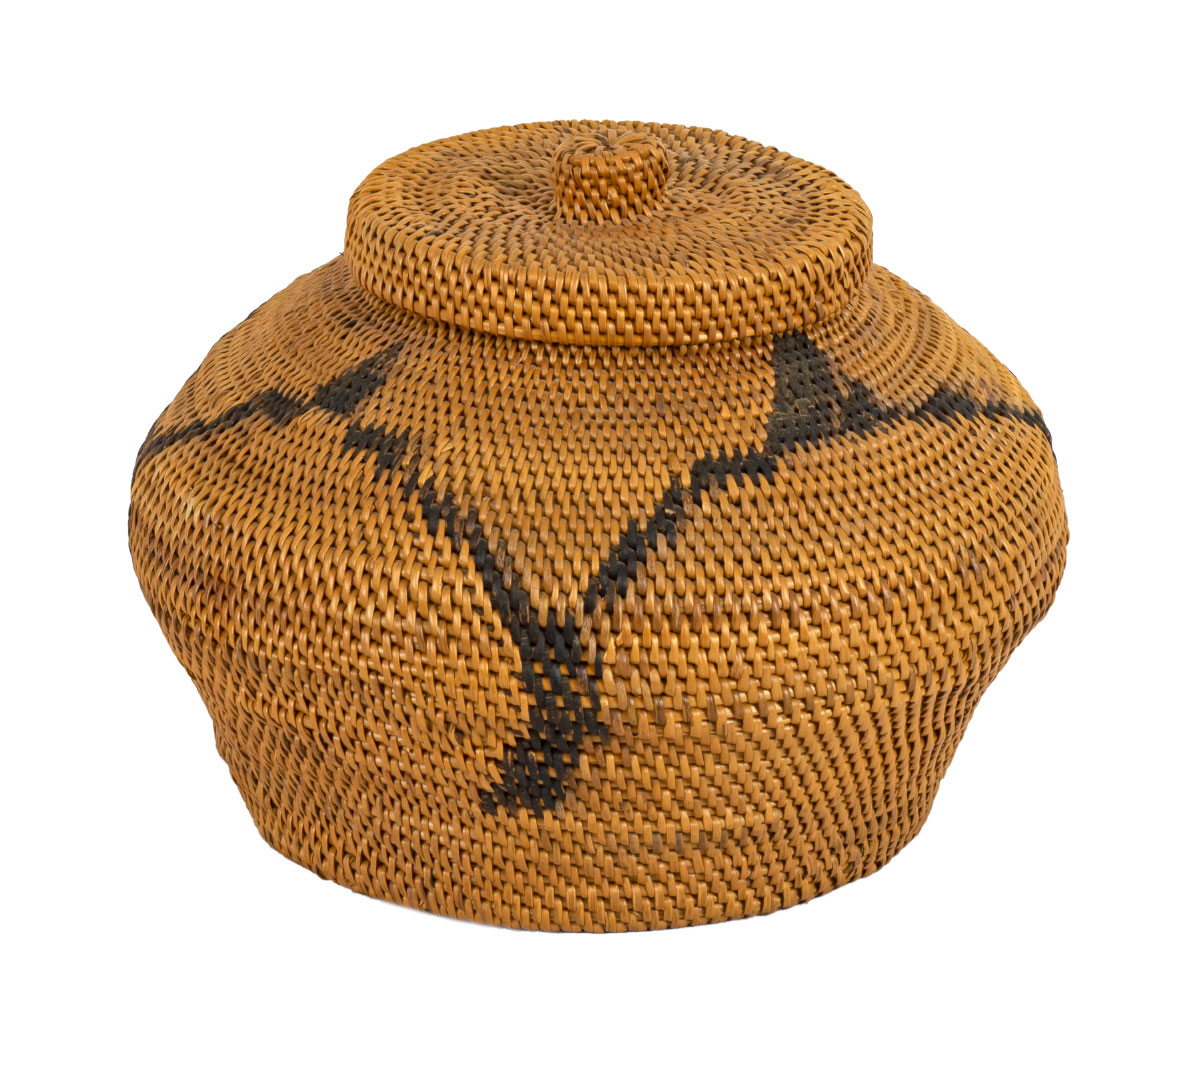 MAIDU , BASKET WITH LID Title: